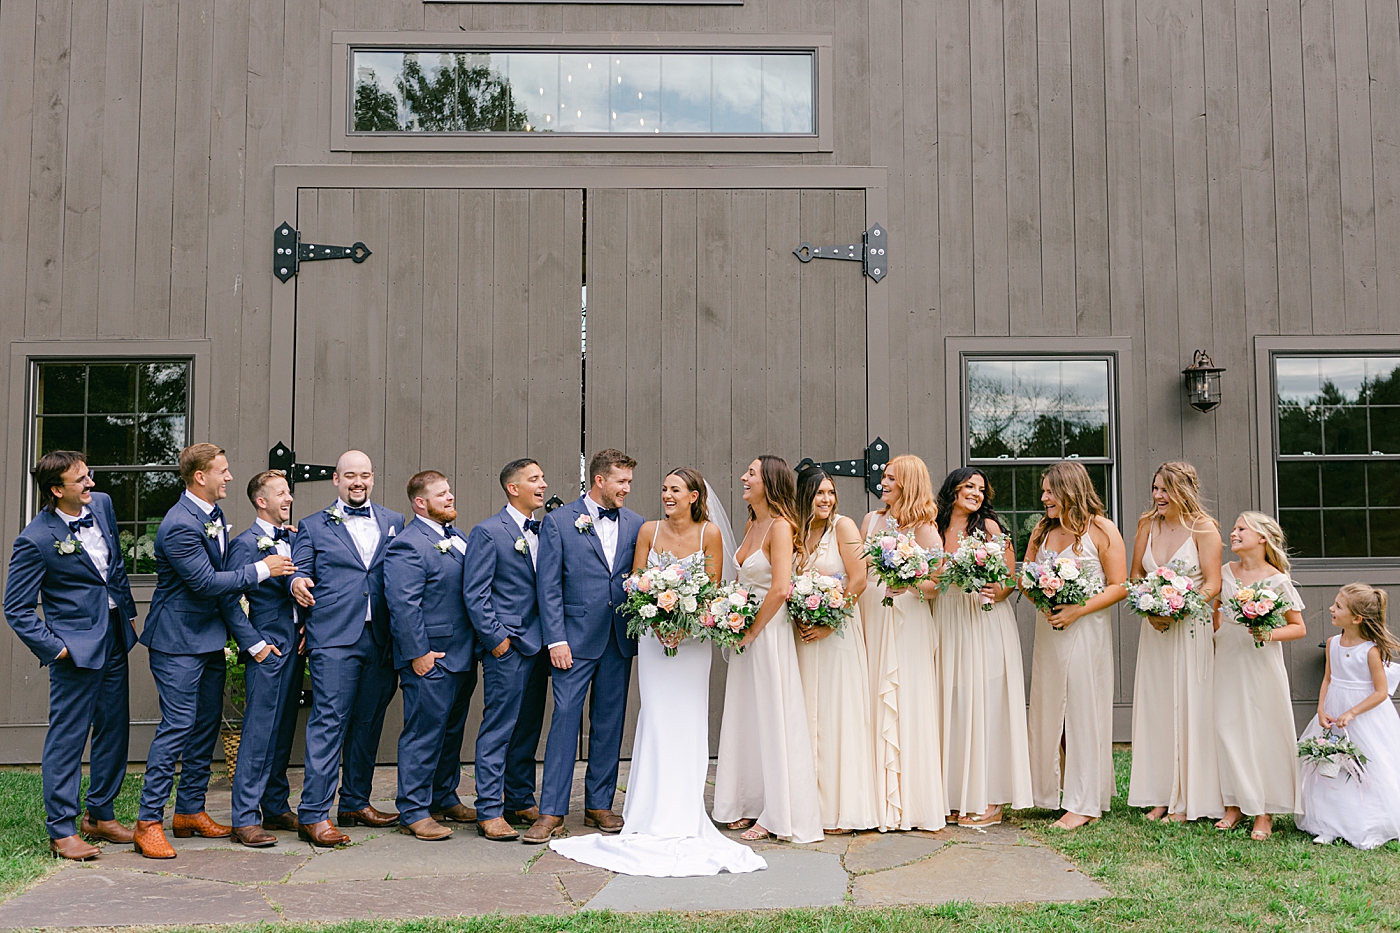 Wedding party laughing together | Image by Hope Helmuth Photography